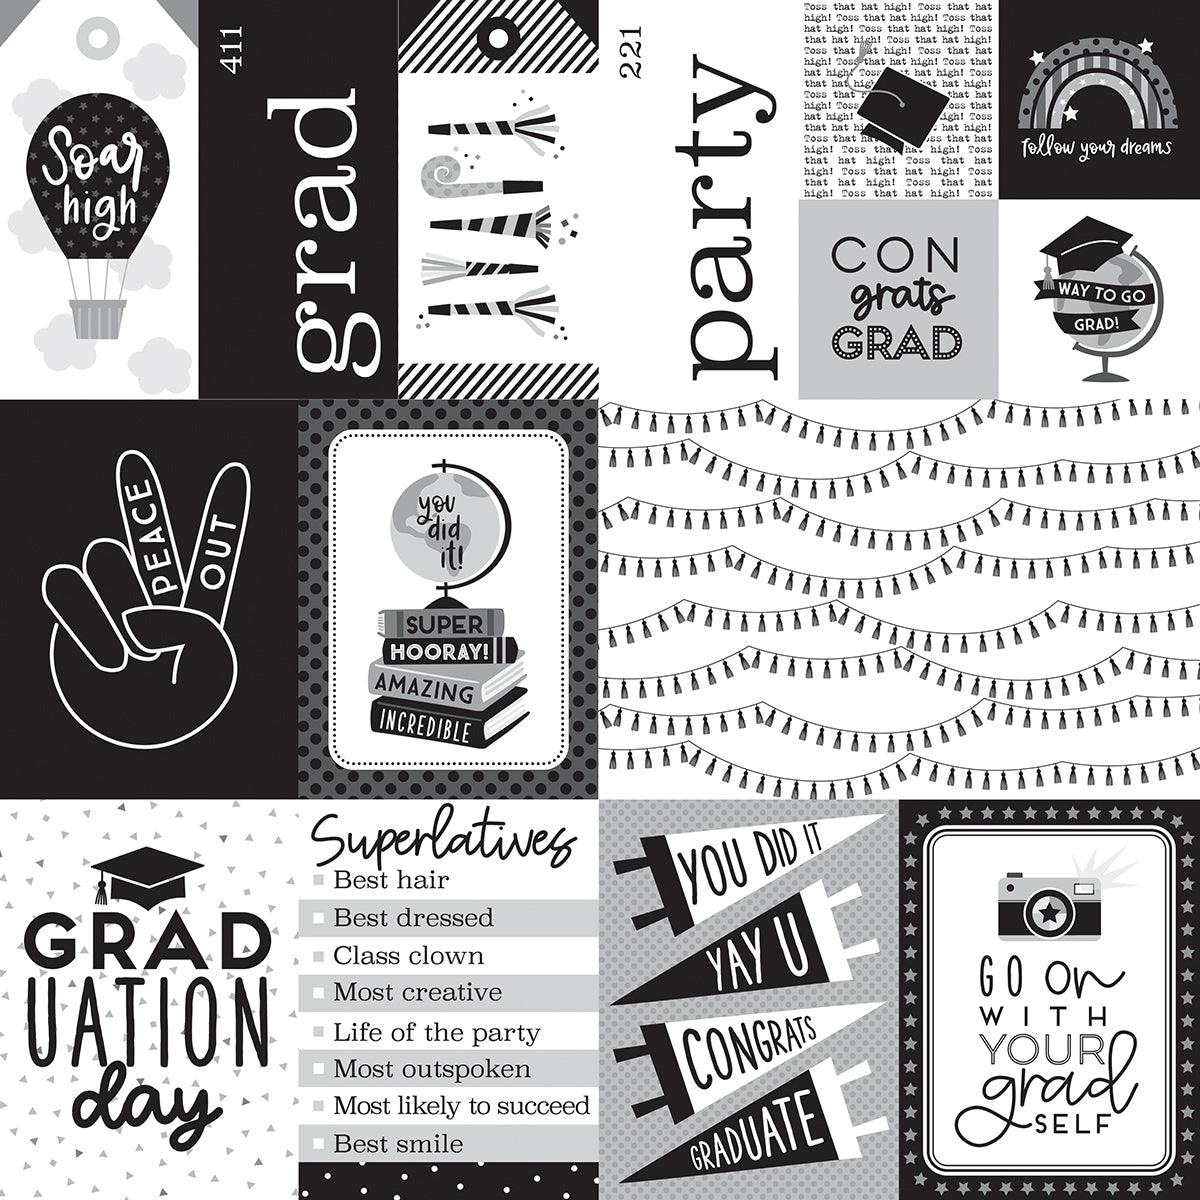 Cap & Gown Collection Daily Details 12 x 12 Double-Sided Scrapbook Paper by Doodlebug Design - Scrapbook Supply Companies